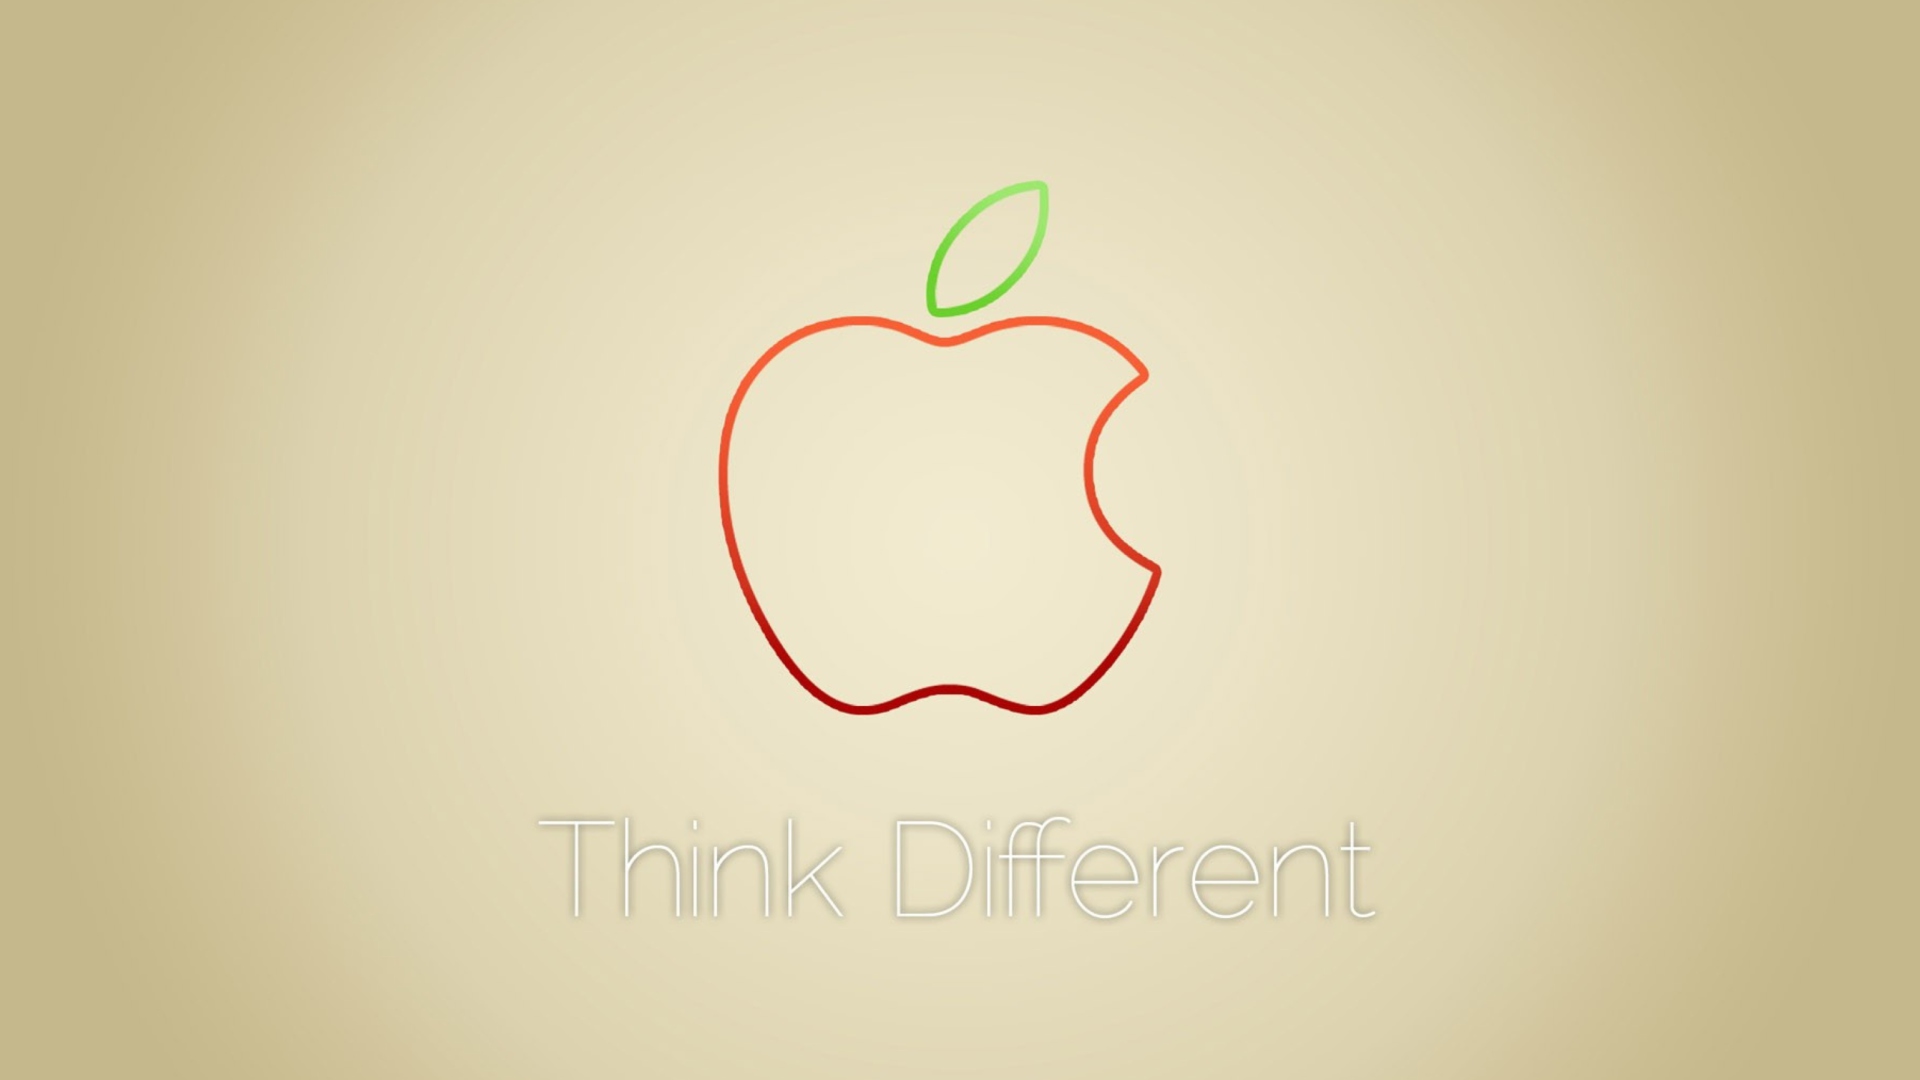 Think Different wallpaper 1920x1080